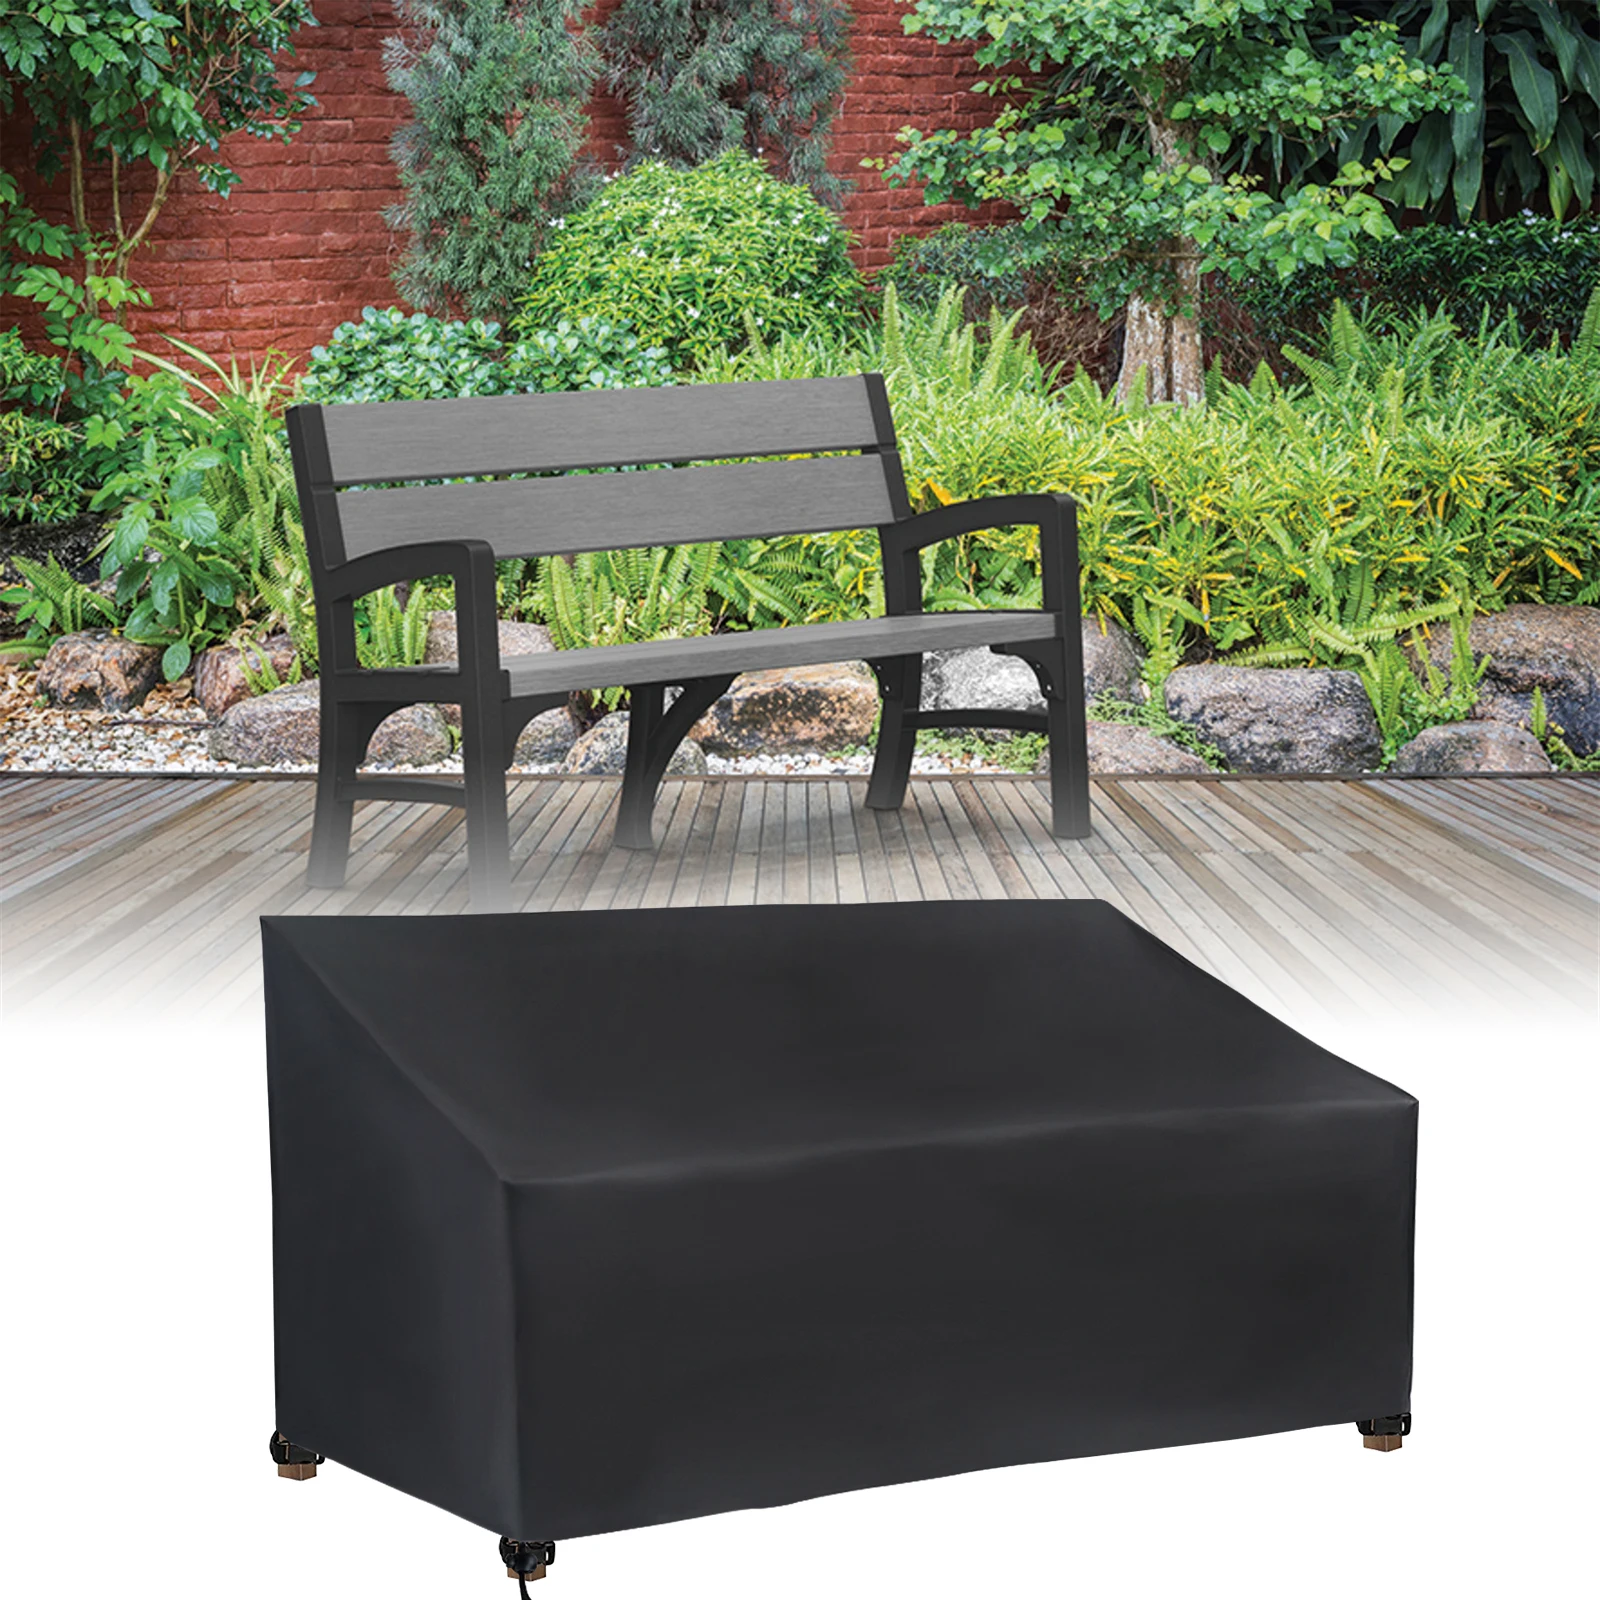 

Multiple Specifications Available Garden Bench Dustproof Cover Garden Bench Waterproof Breathable Outdoor Bench Seat Cover Black